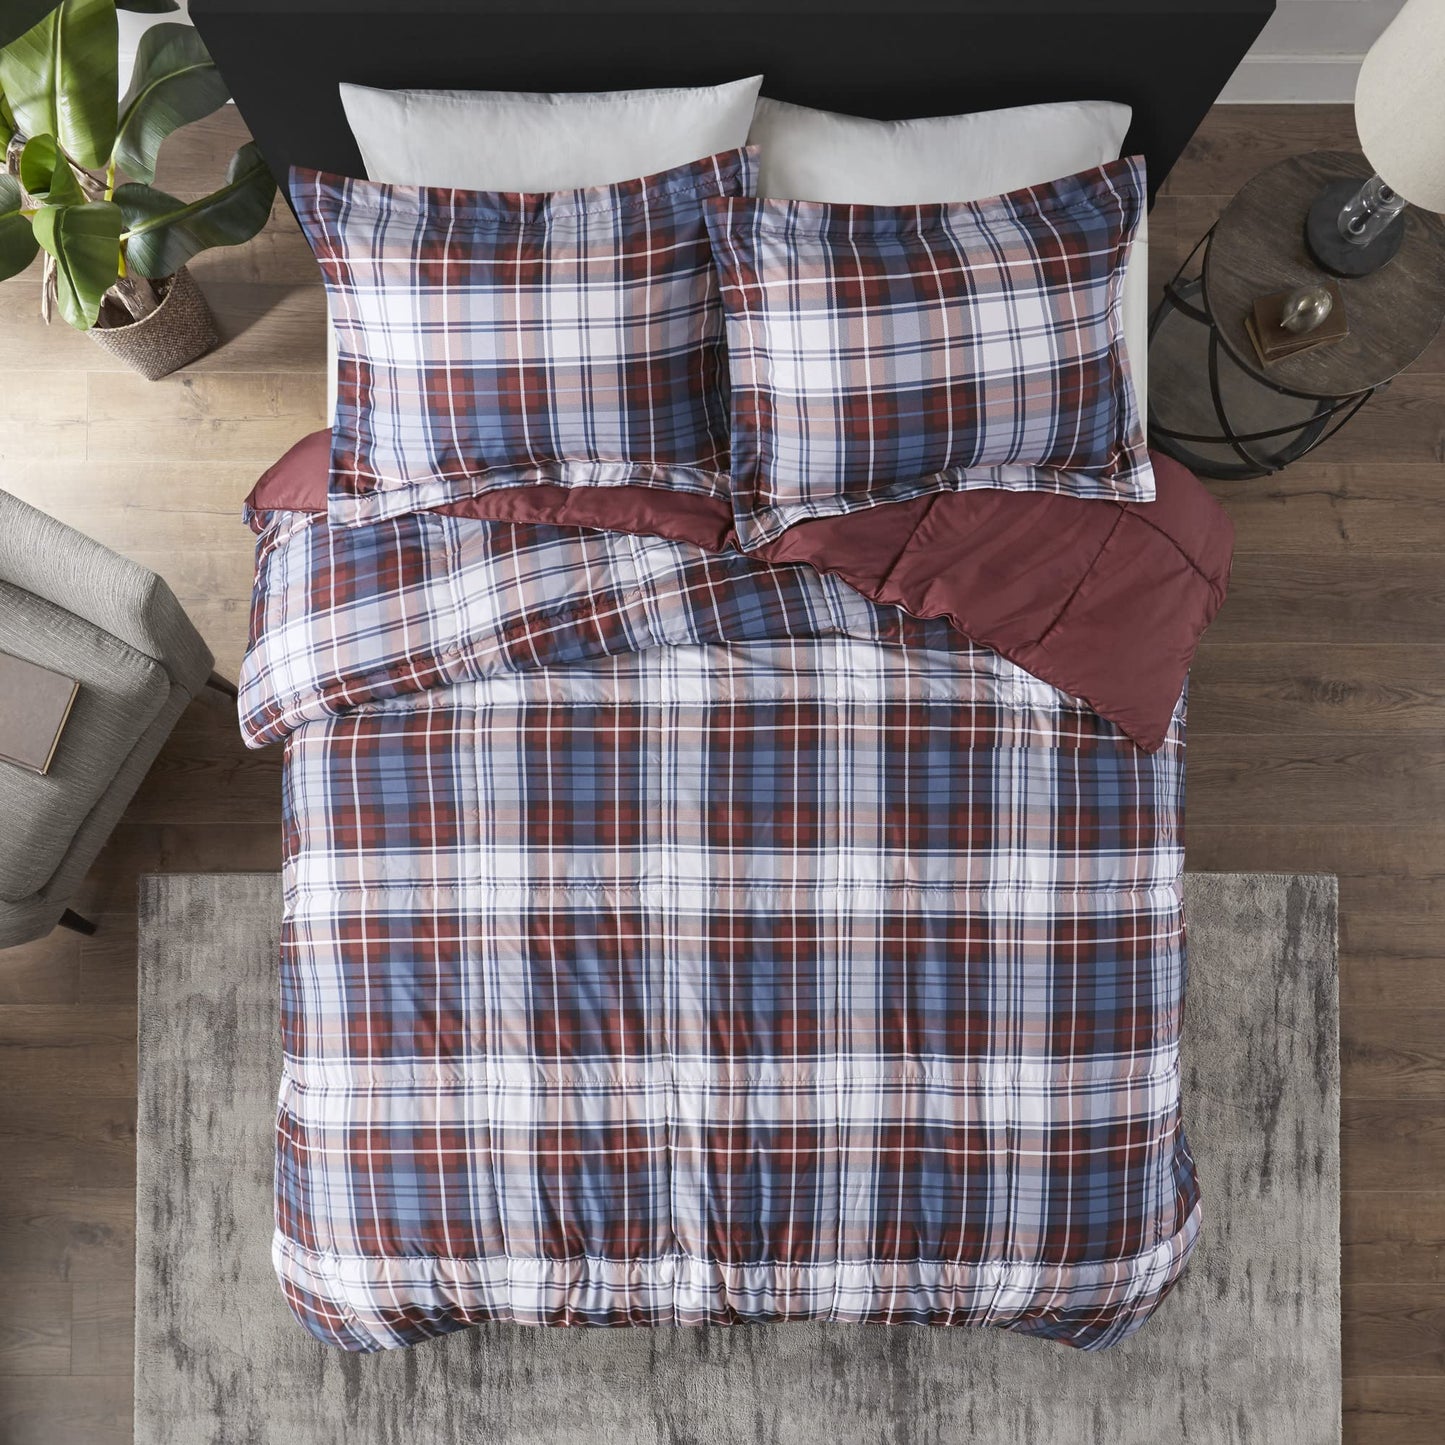 Madison Park Essentials Parkston Plaid Comforter, Matching Sham, 3M Scotchguard Stain Release Cover, Hypoallergenic All Season Bedding-Set, Twin/ Twin XL, Red, 2 Piece